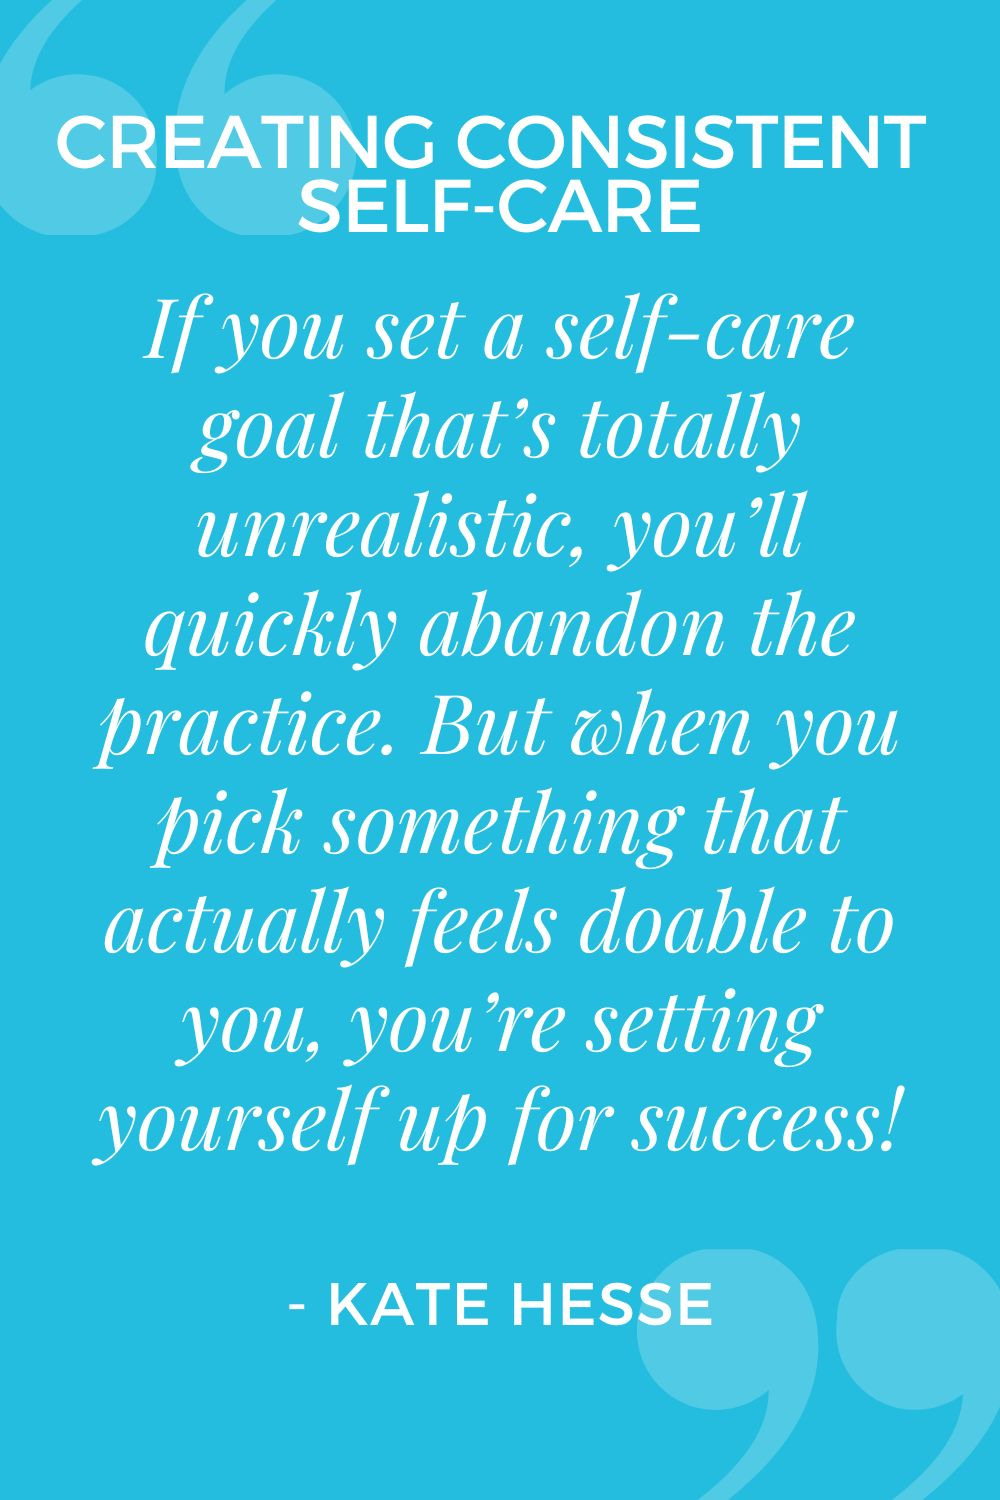 If you set a self-care goal that's totally unrealistic, you'll quickly abandon the practice. But when you pick something that actually feels doable to you, you're setting yourself up for success!